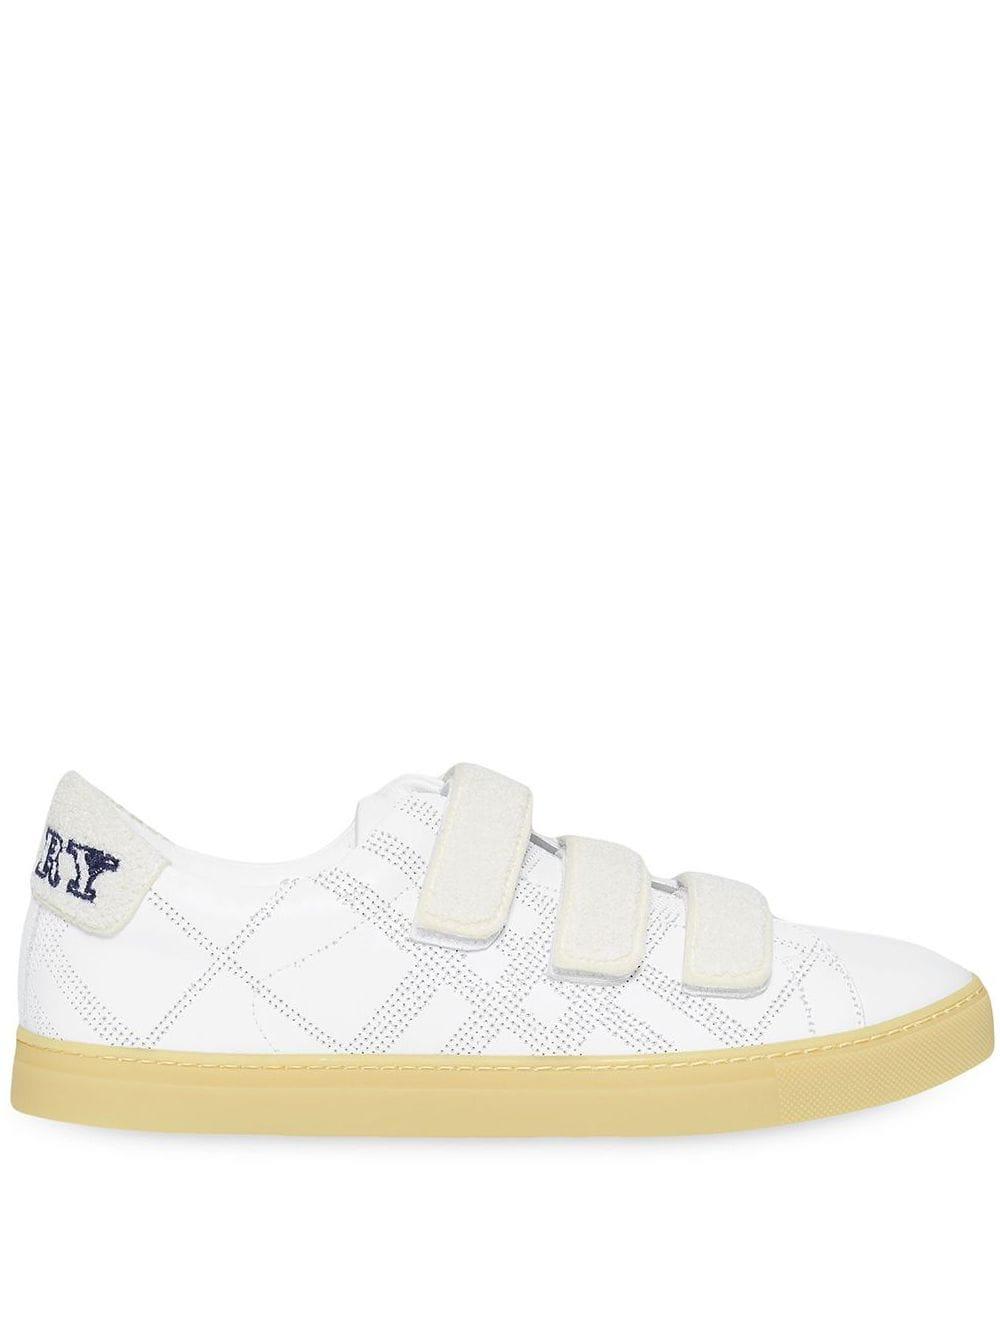 Burberry Leather Strap Detail Perforated Check Sneakers in White for Men |  Lyst